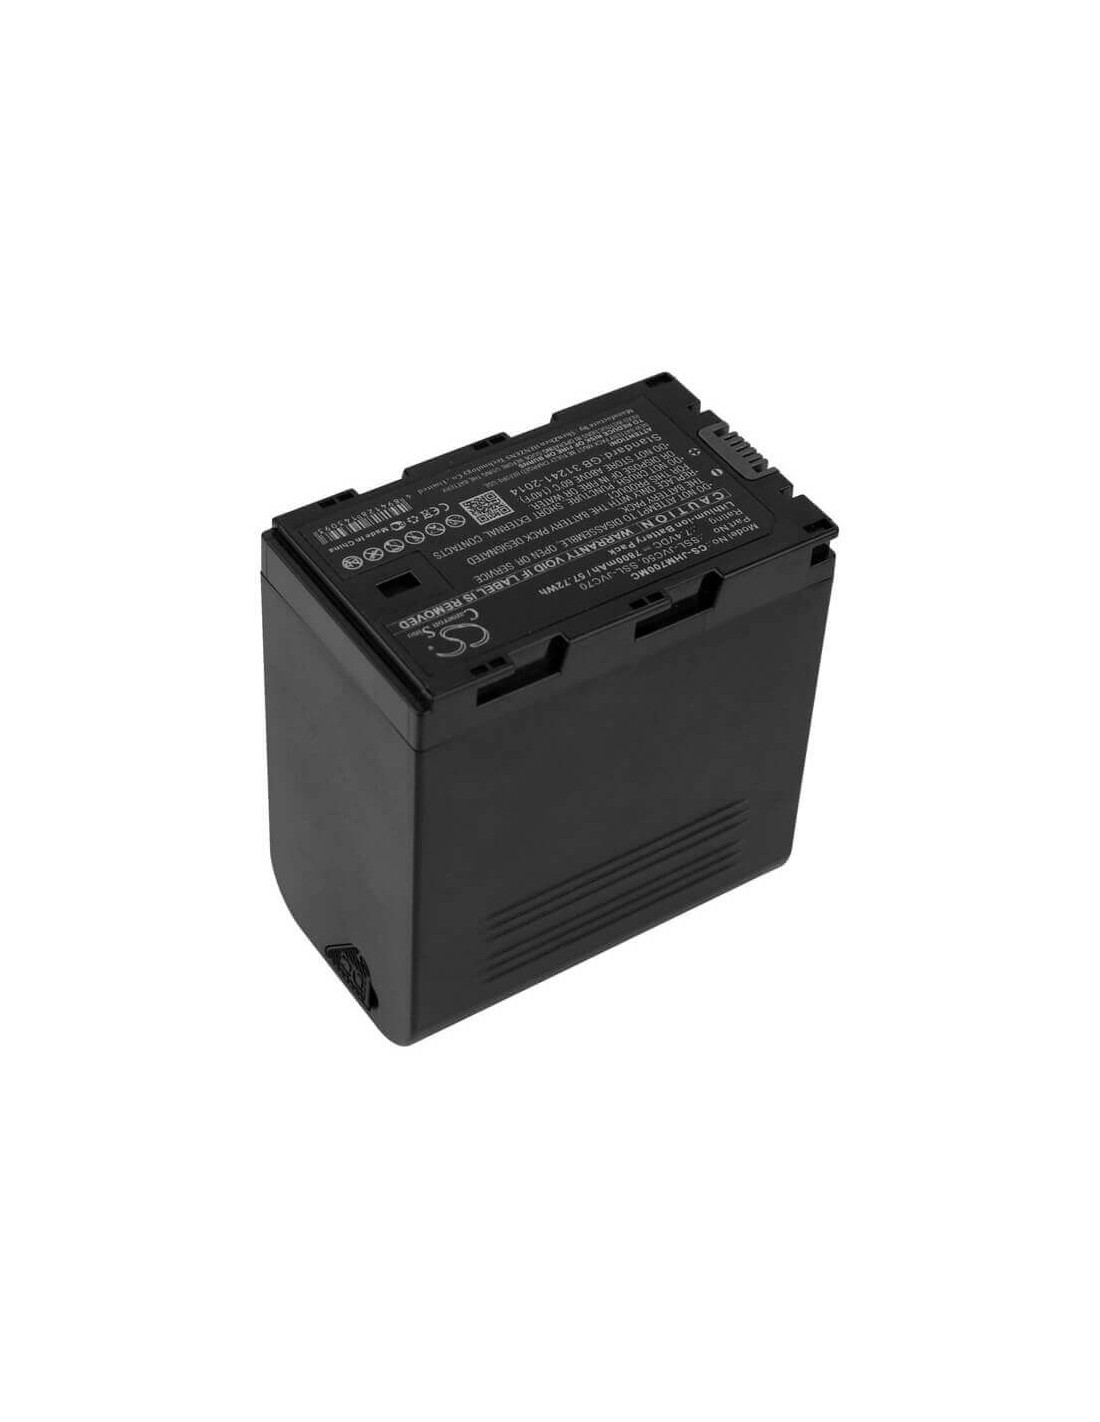 Battery for Jvc, Gy-hm200, Gy-hm200e 7.4V, 7800mAh - 57.72Wh